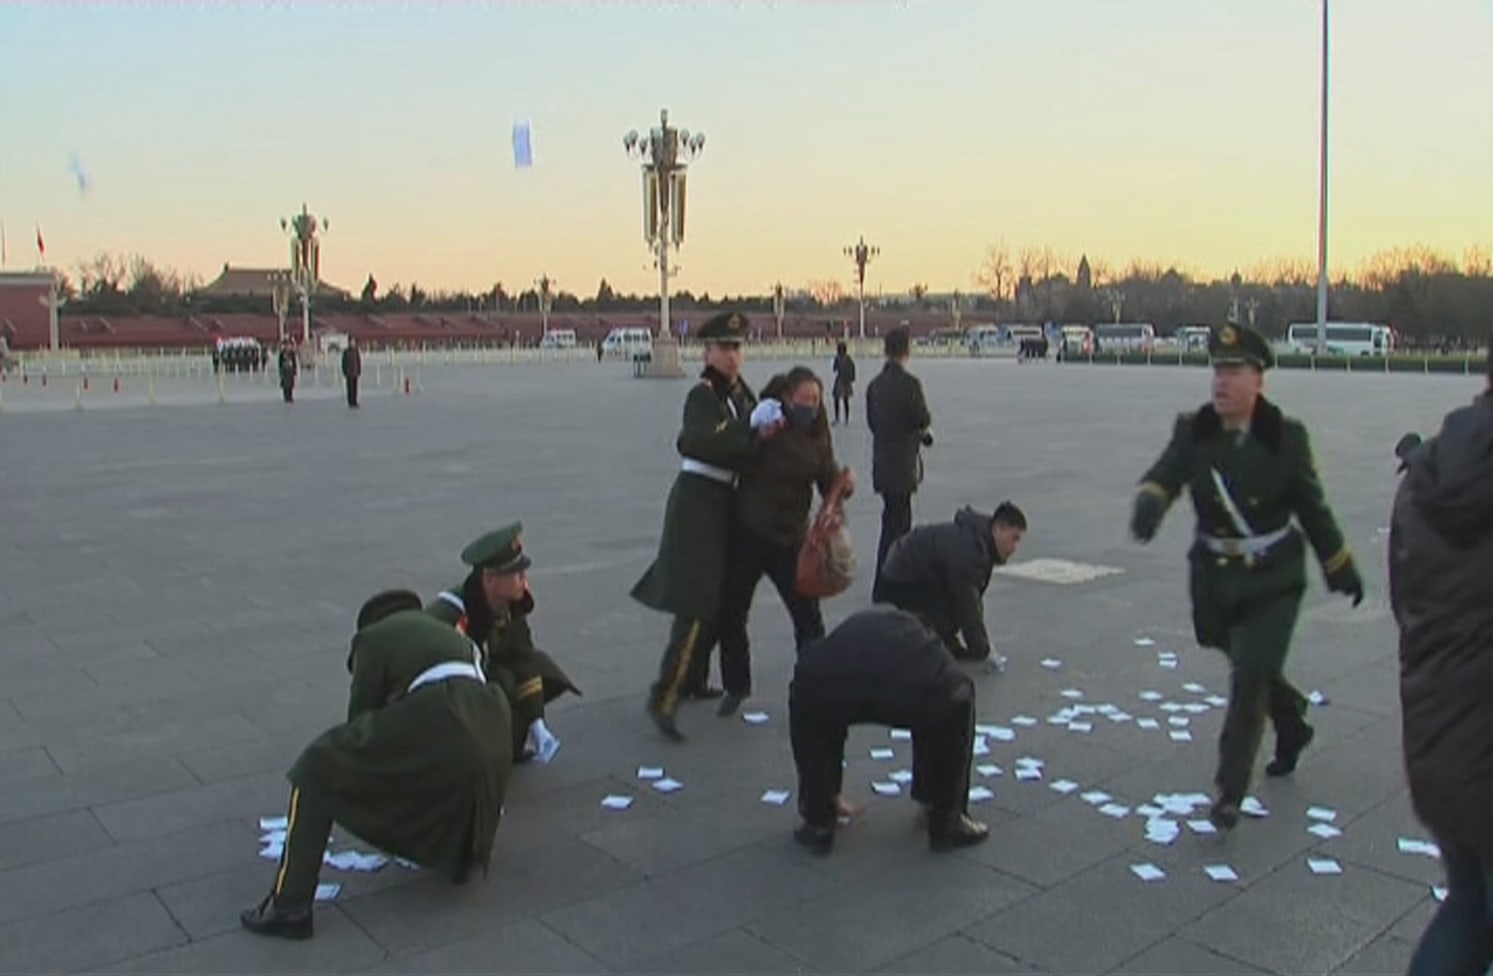 A video grab shows a protester being restrained, as paramilitary officers pick up leaflets during a protest in Tiananmen Square in Beijing, before the opening of the National People's Congress, 5 March 2014, REUTERS/Reuters TV